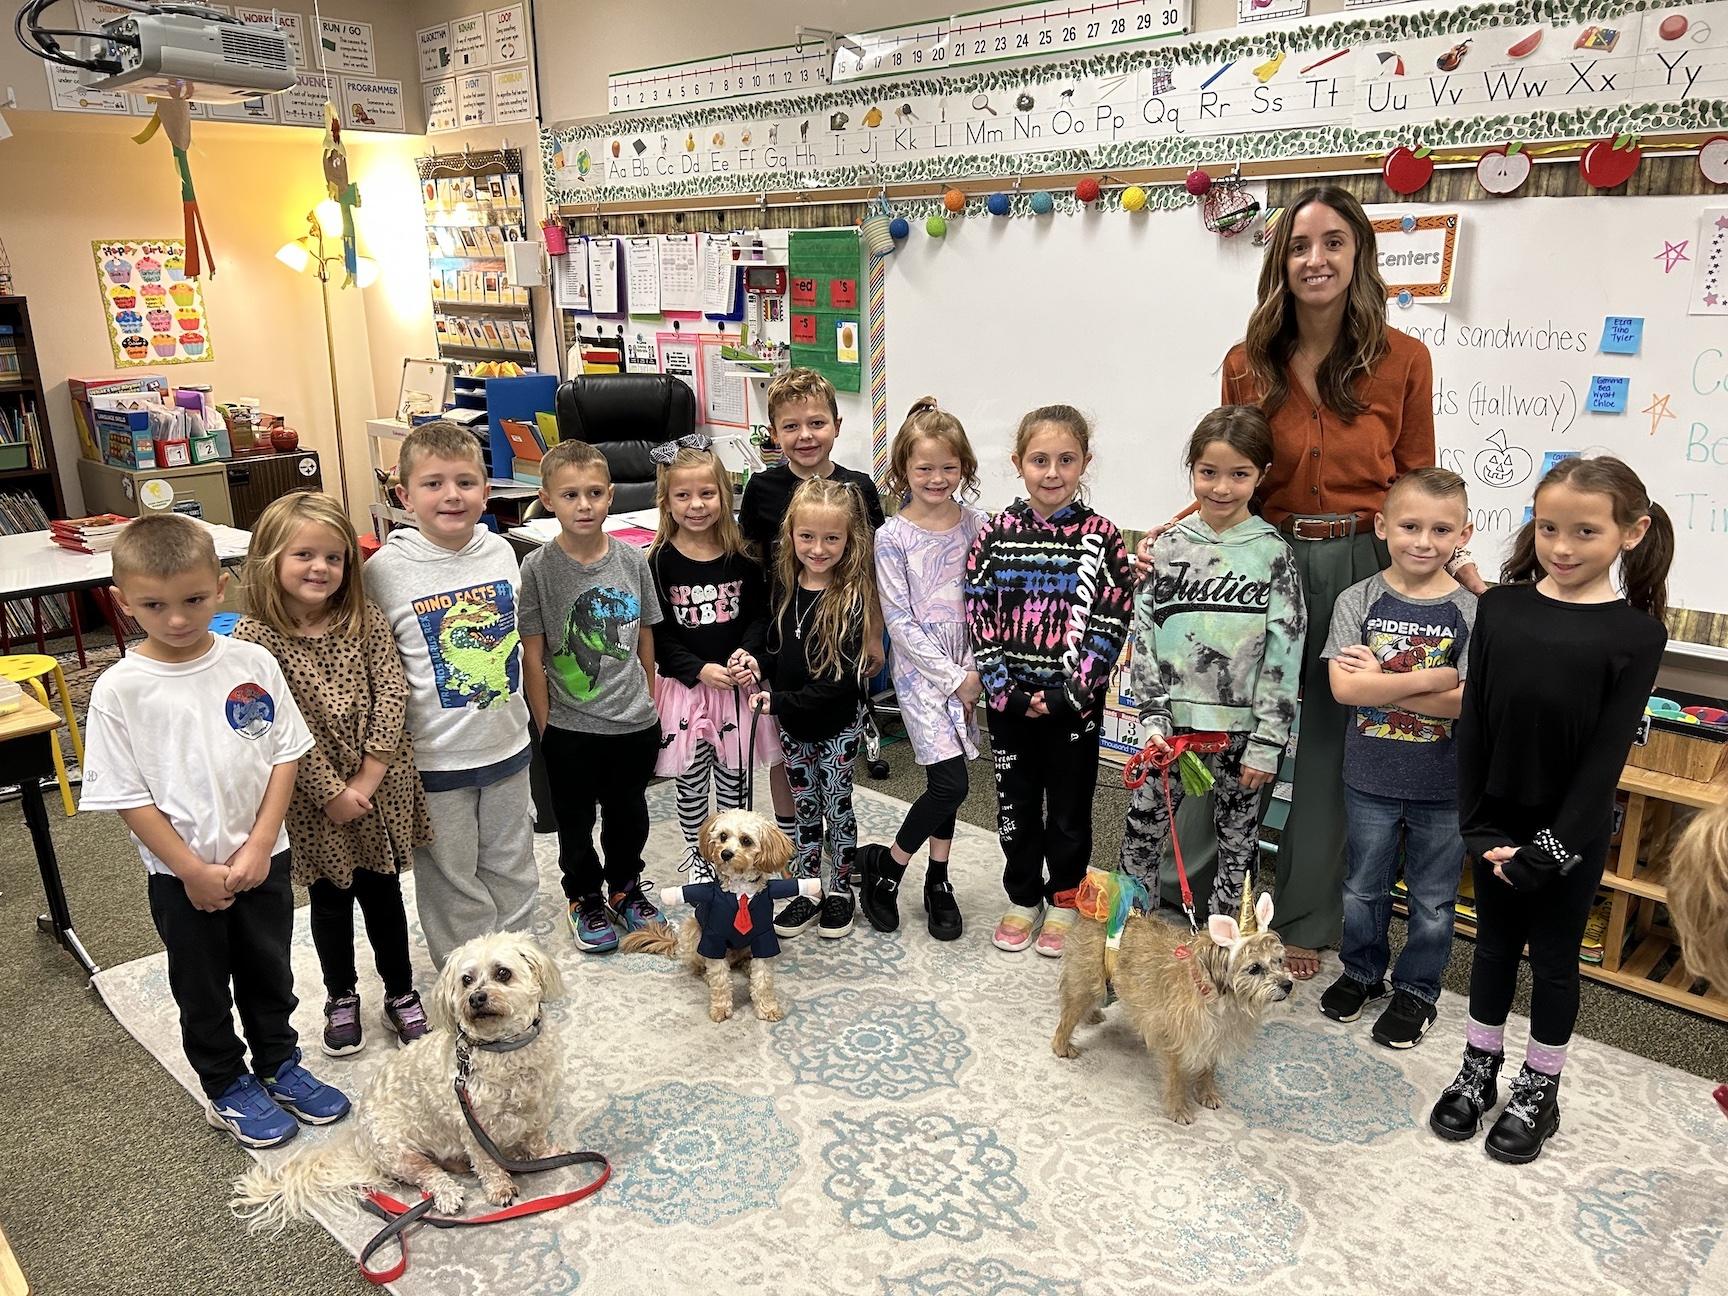 Mrs. Shogan and her students welcomed Essie, Peanut, and Cappi to their classroom